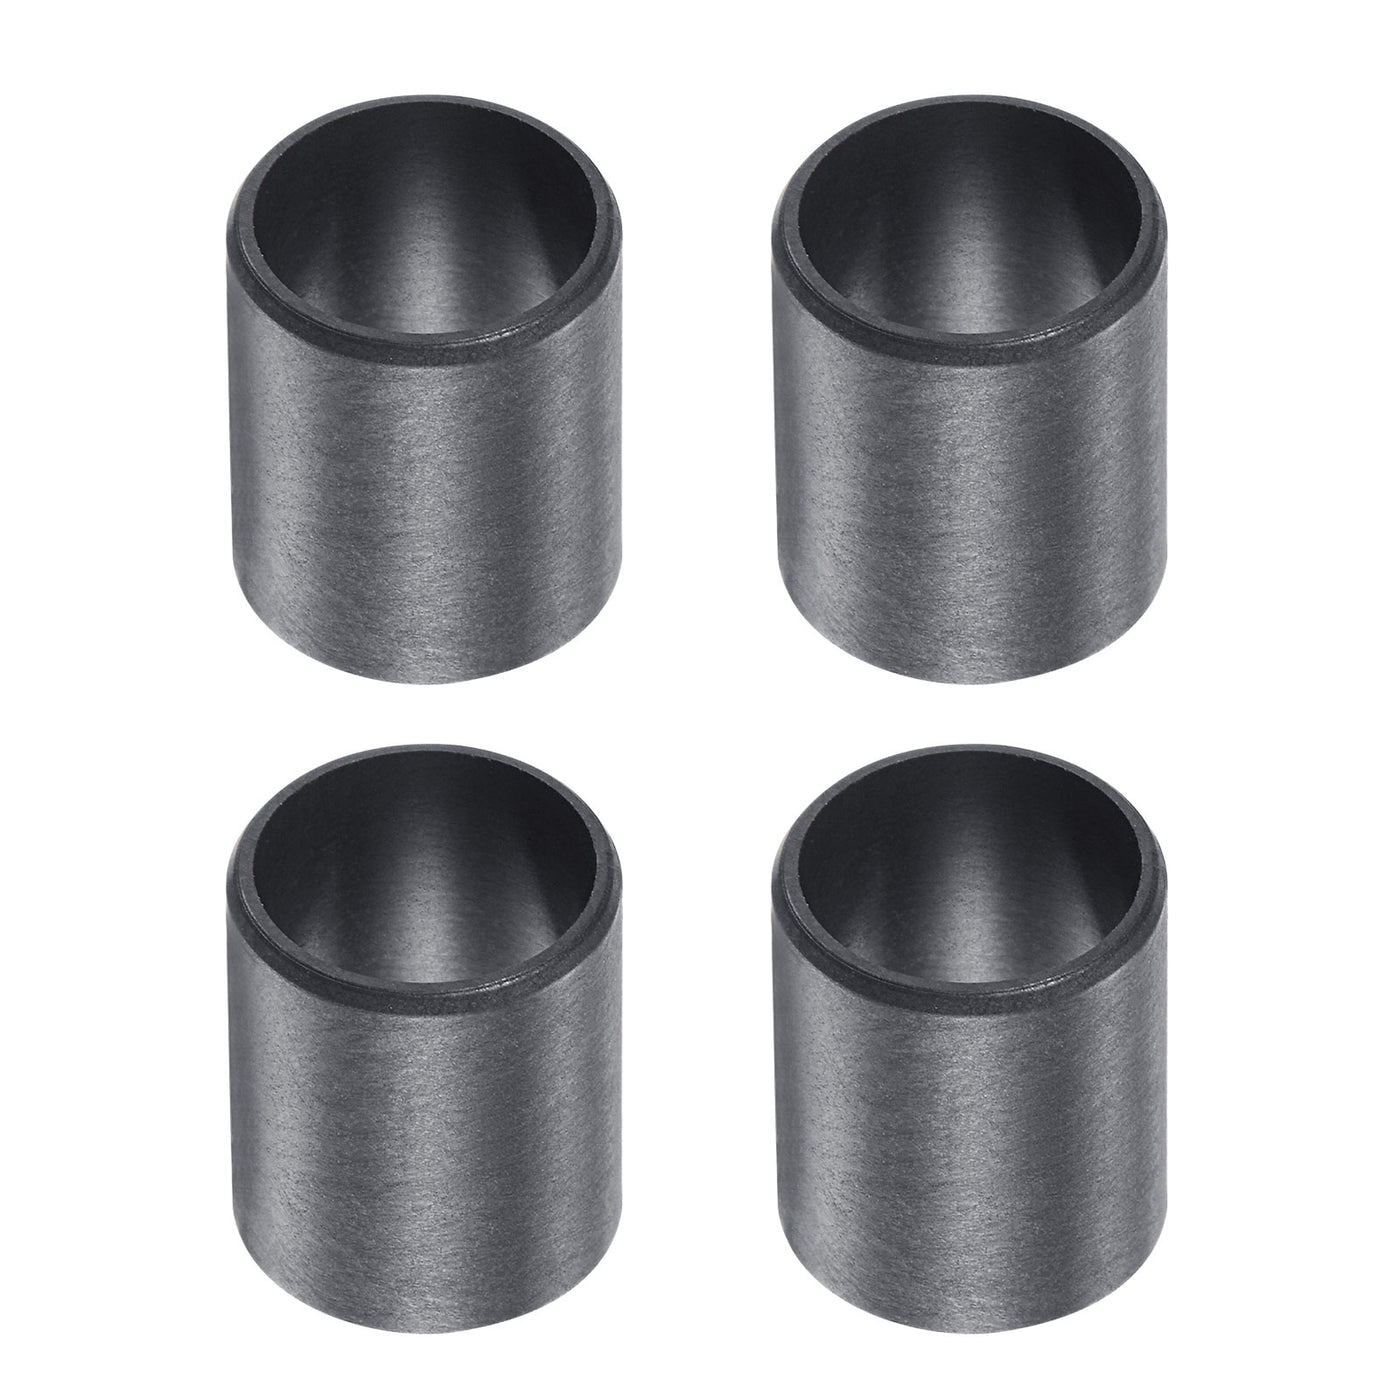 uxcell Uxcell Sleeve Bearings 12mmx14mmx17mm POM Wrapped Oilless Bushings Black 4pcs